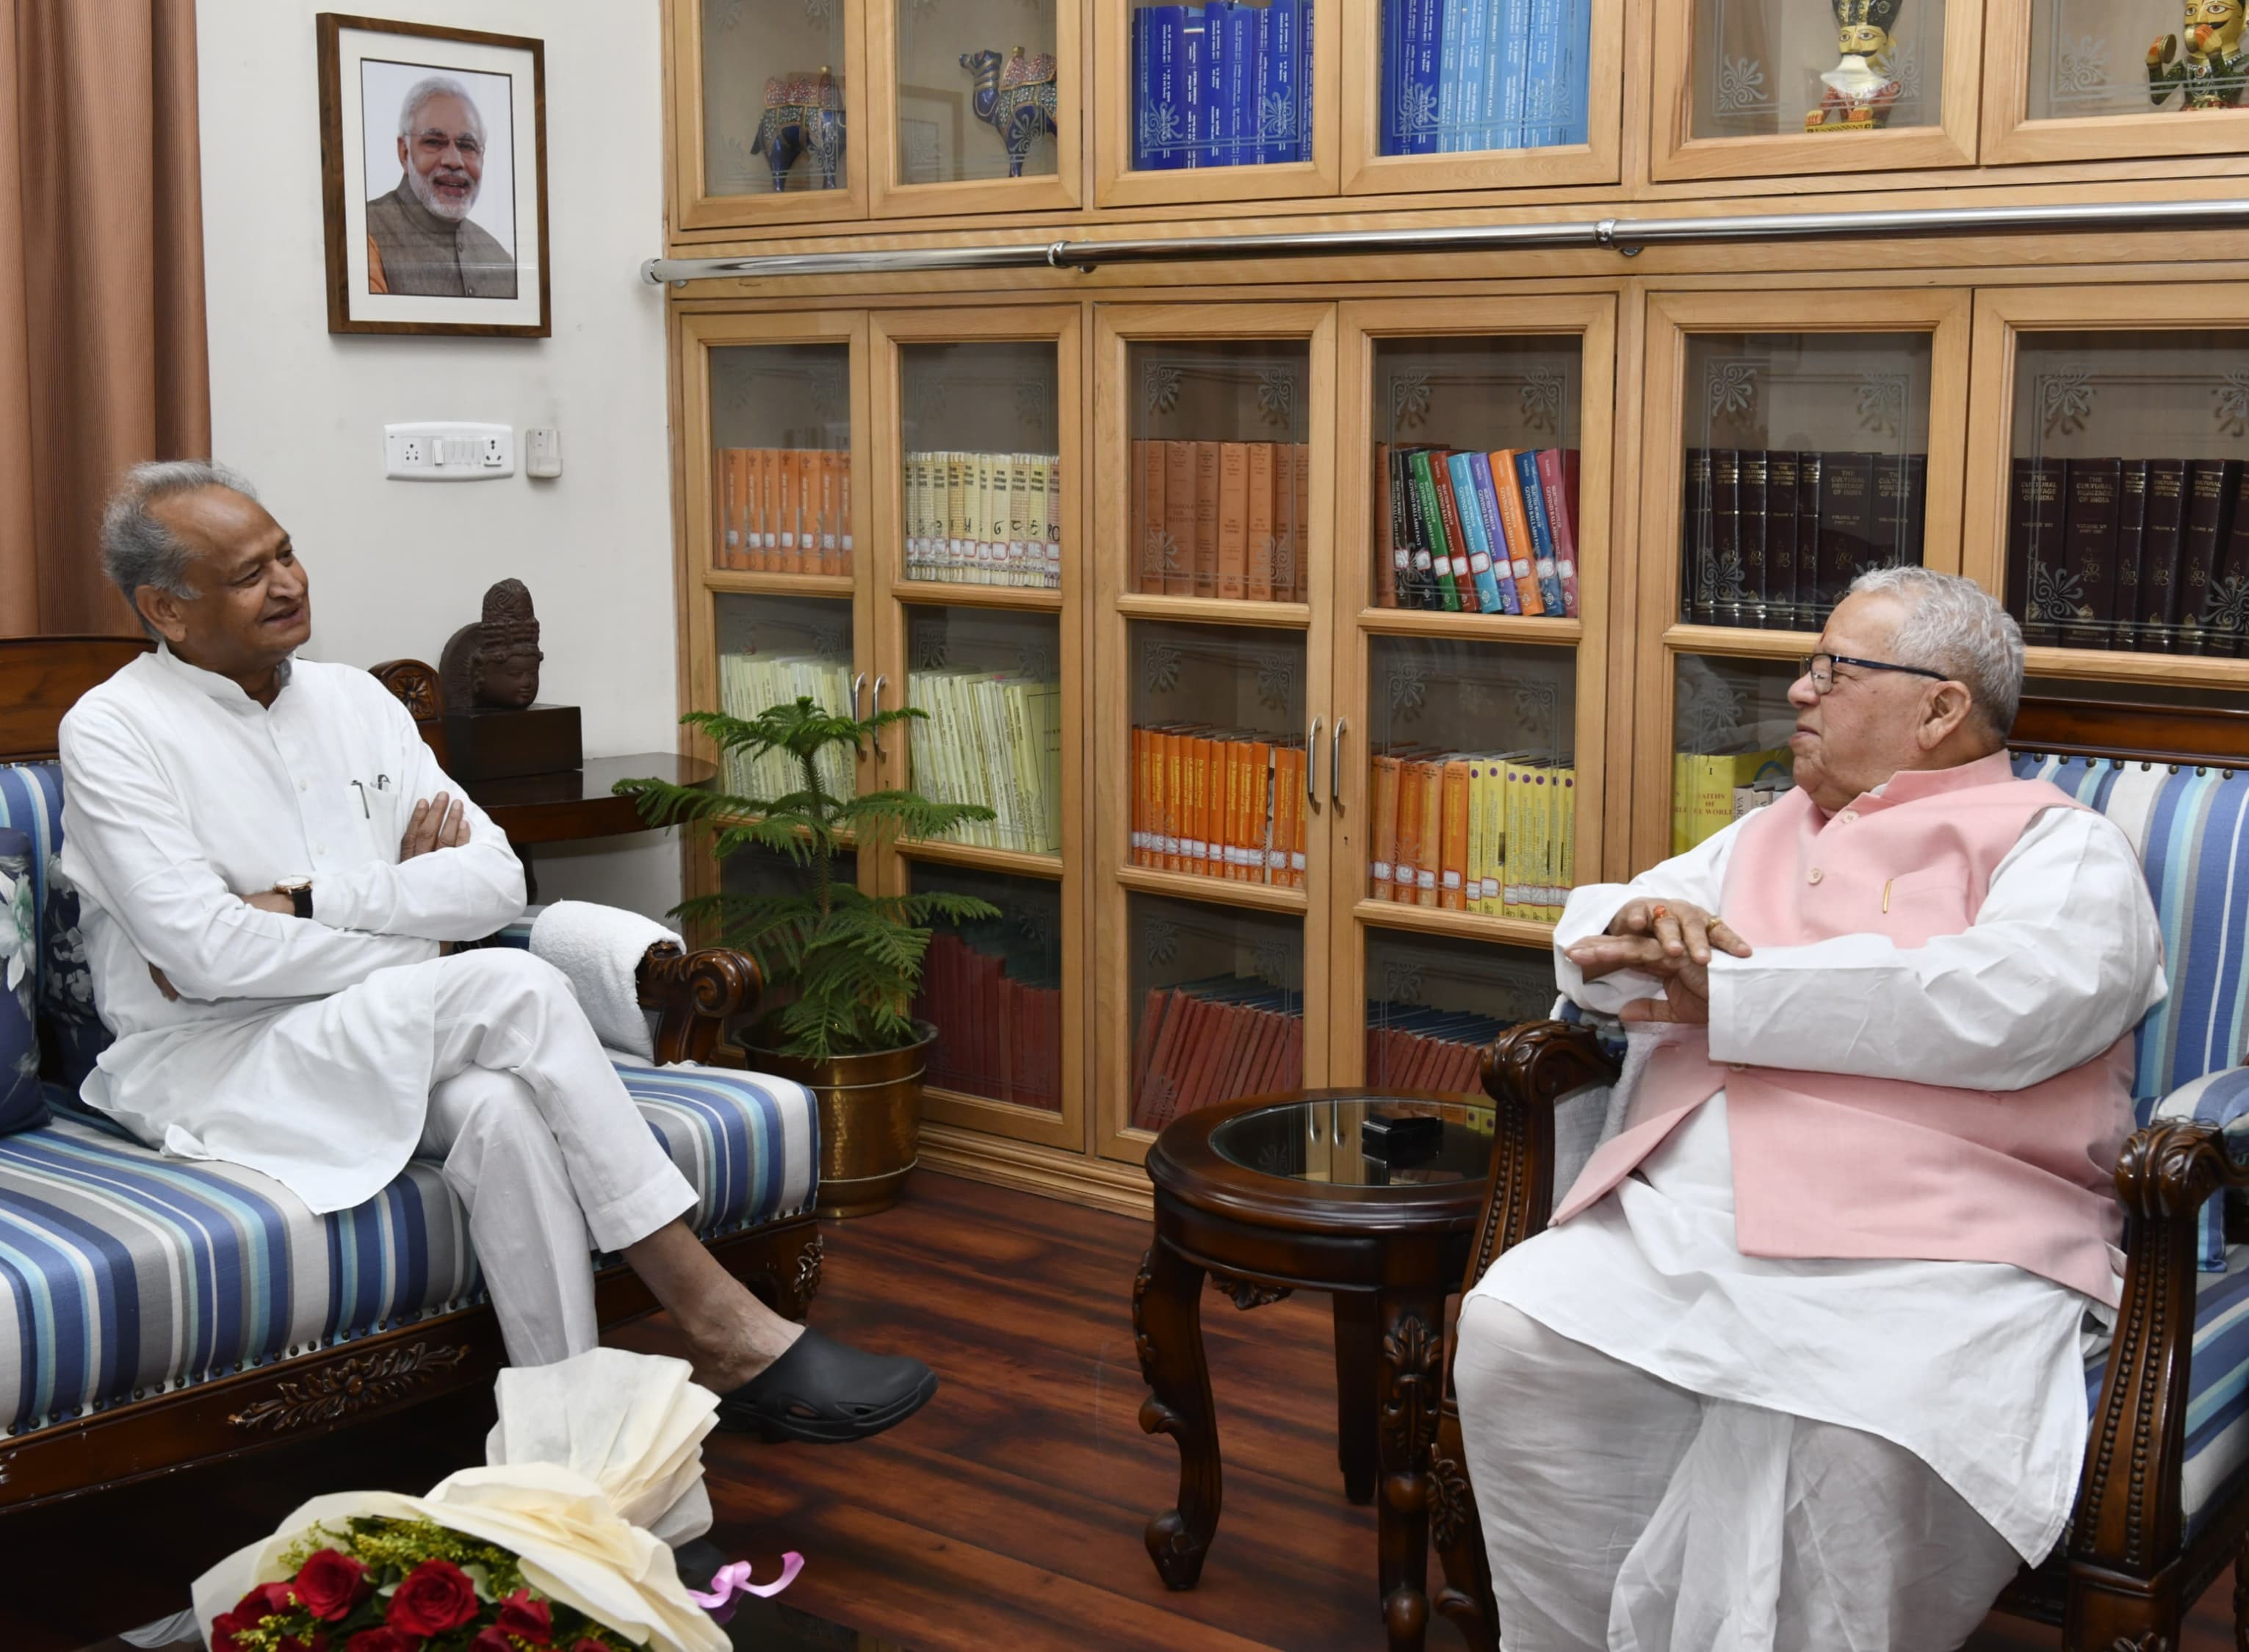 Former Chief Minister Gehlot paid courtesy call on the Governor